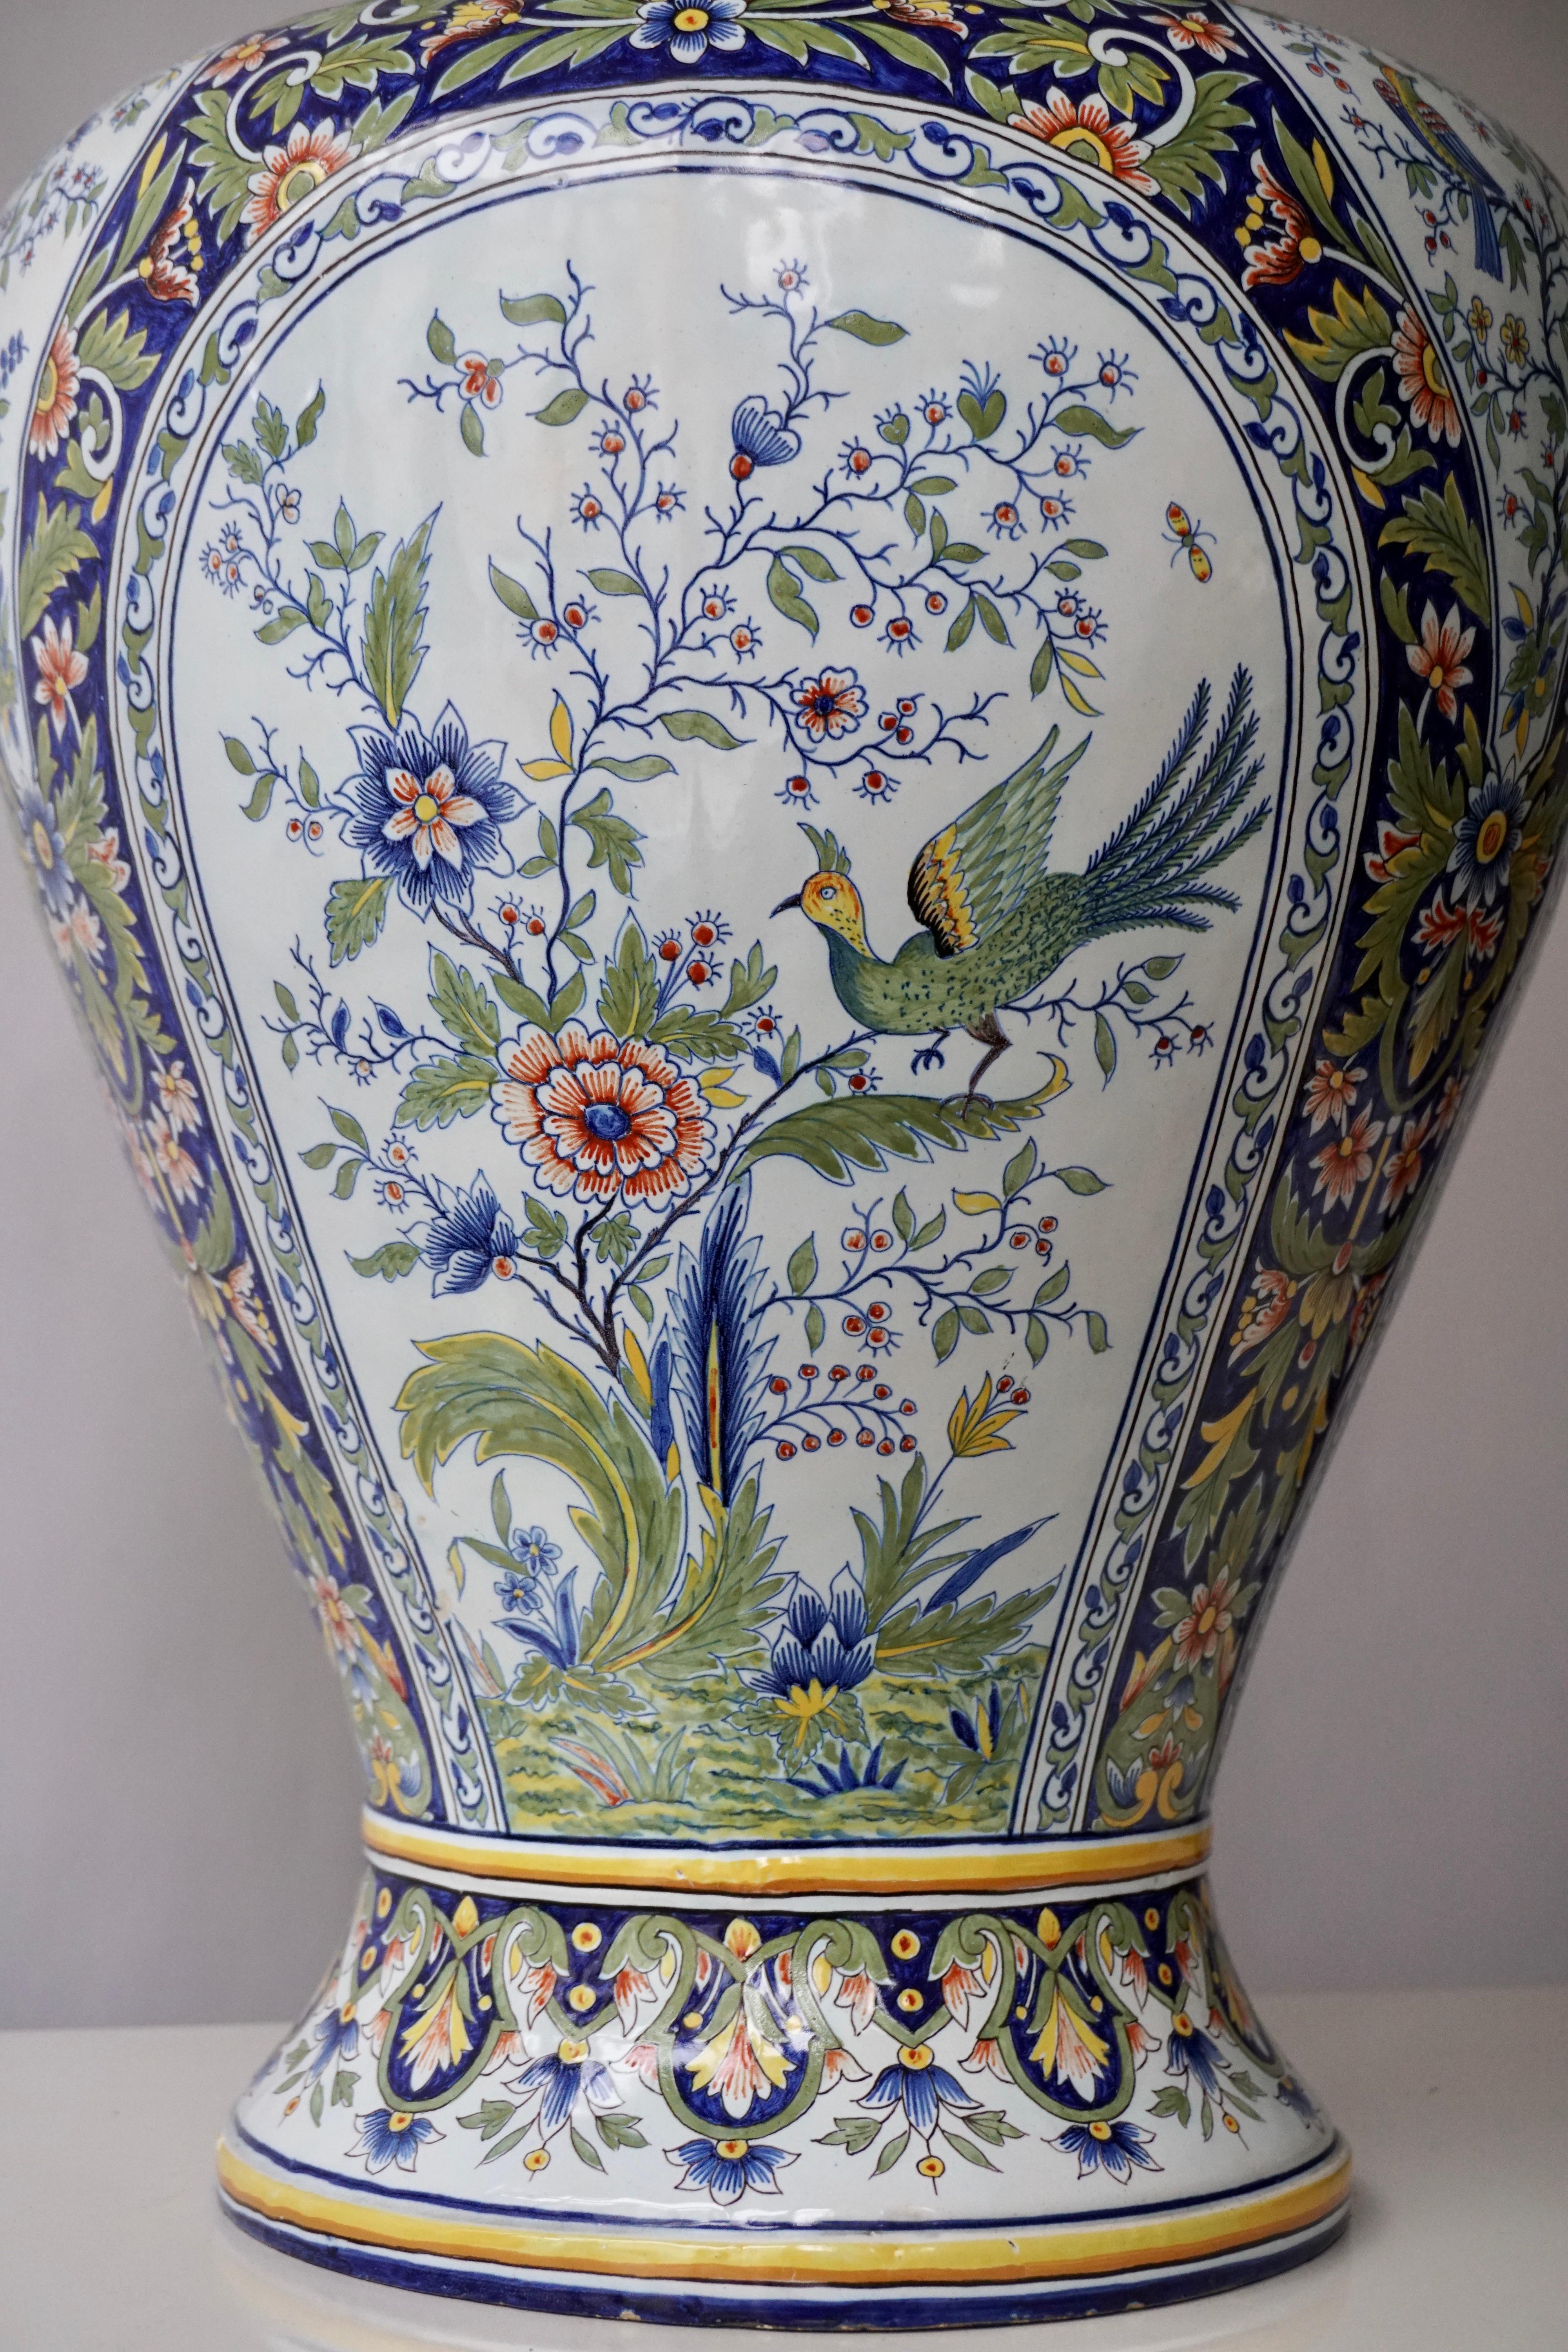 20th Century French Hand Painted Faience Urn or Vase with Flowers and Birds Motifs